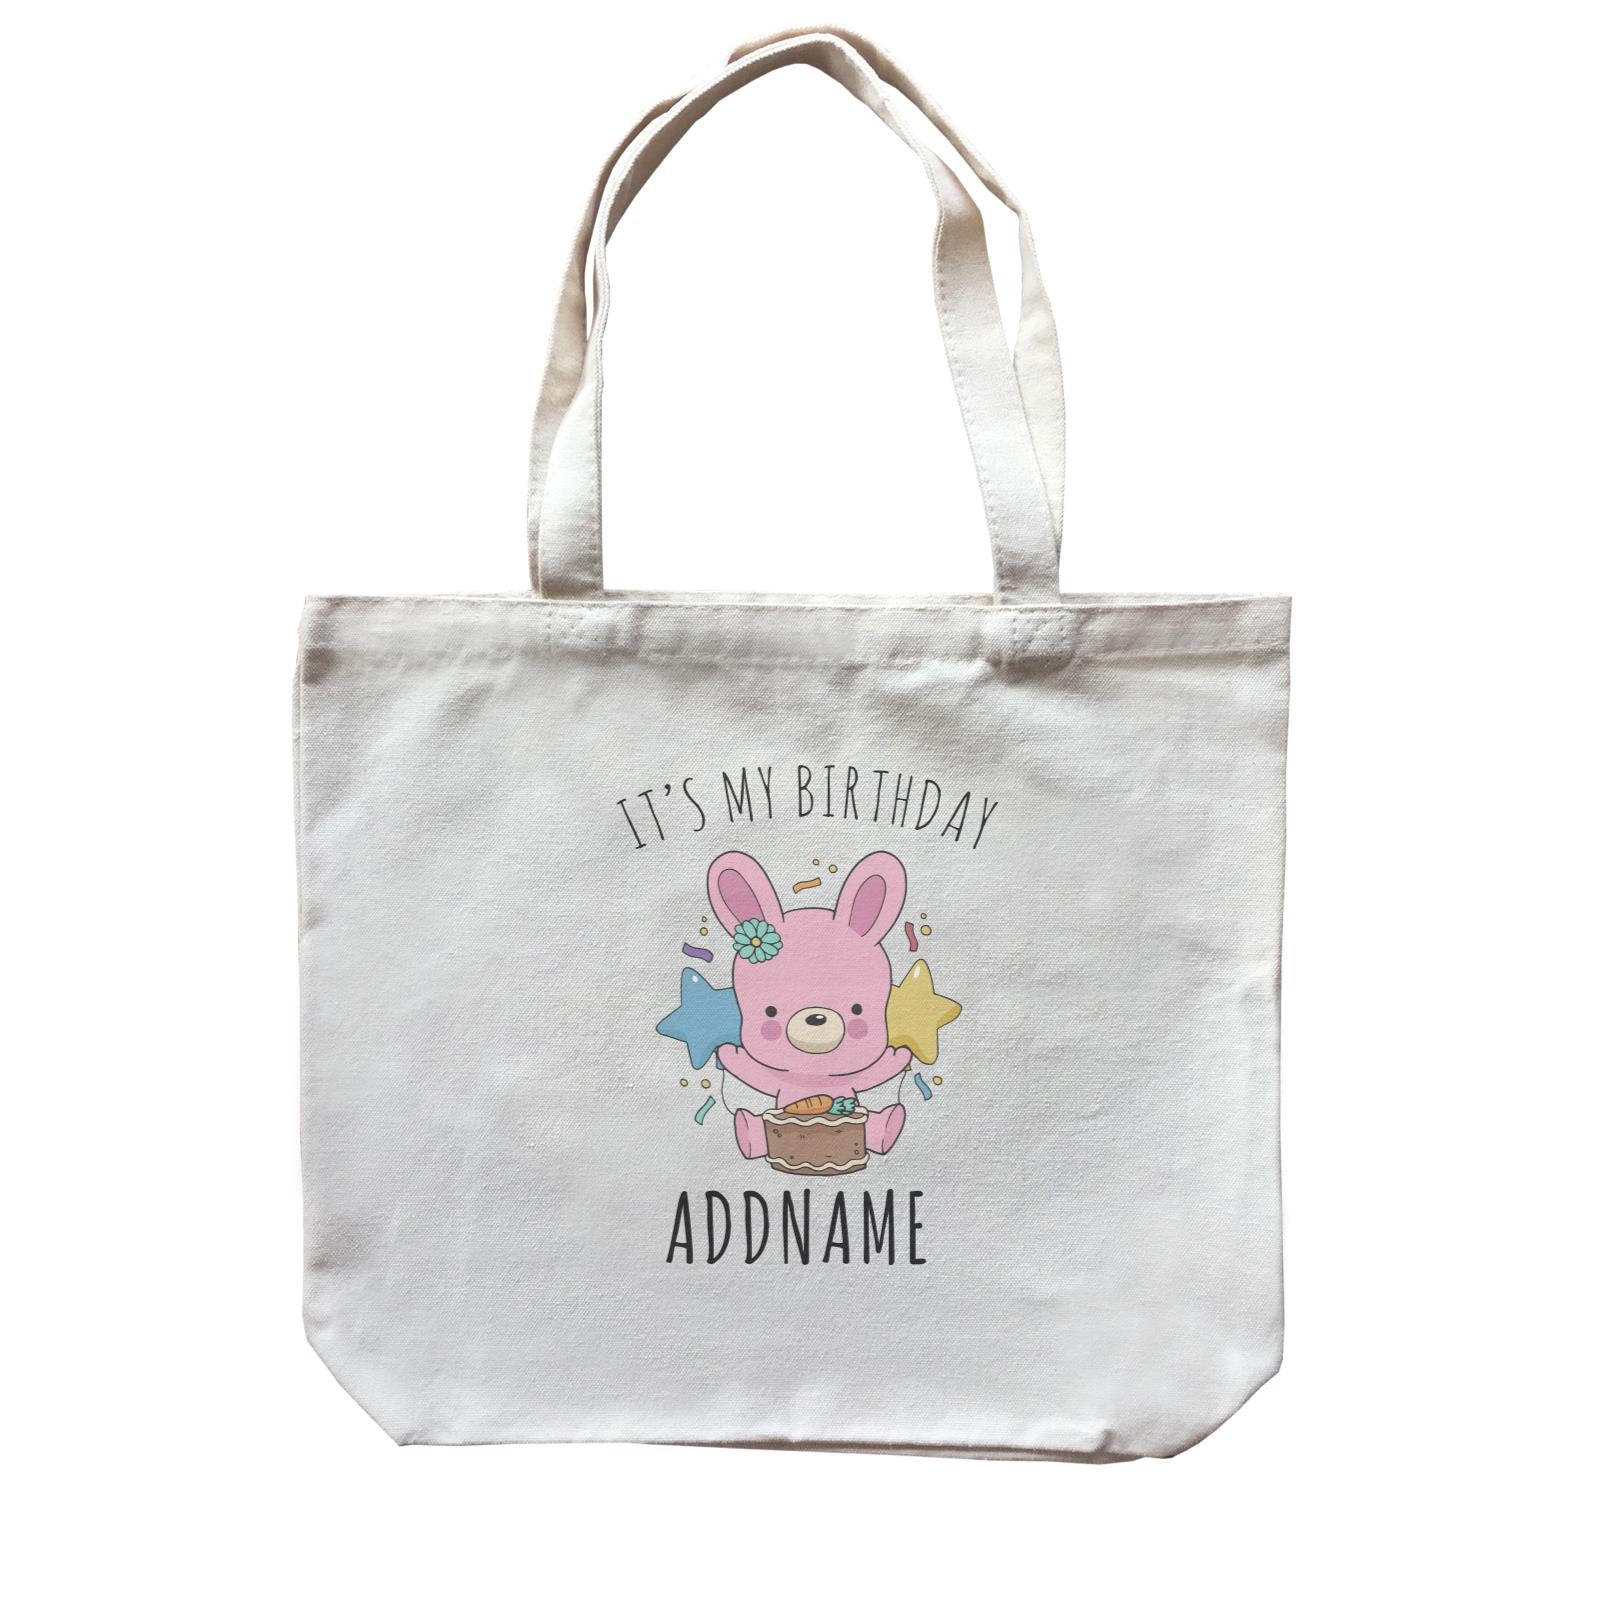 Birthday Sketch Animals Rabbit With Carrot Cake It's My Birthday Addname Canvas Bag